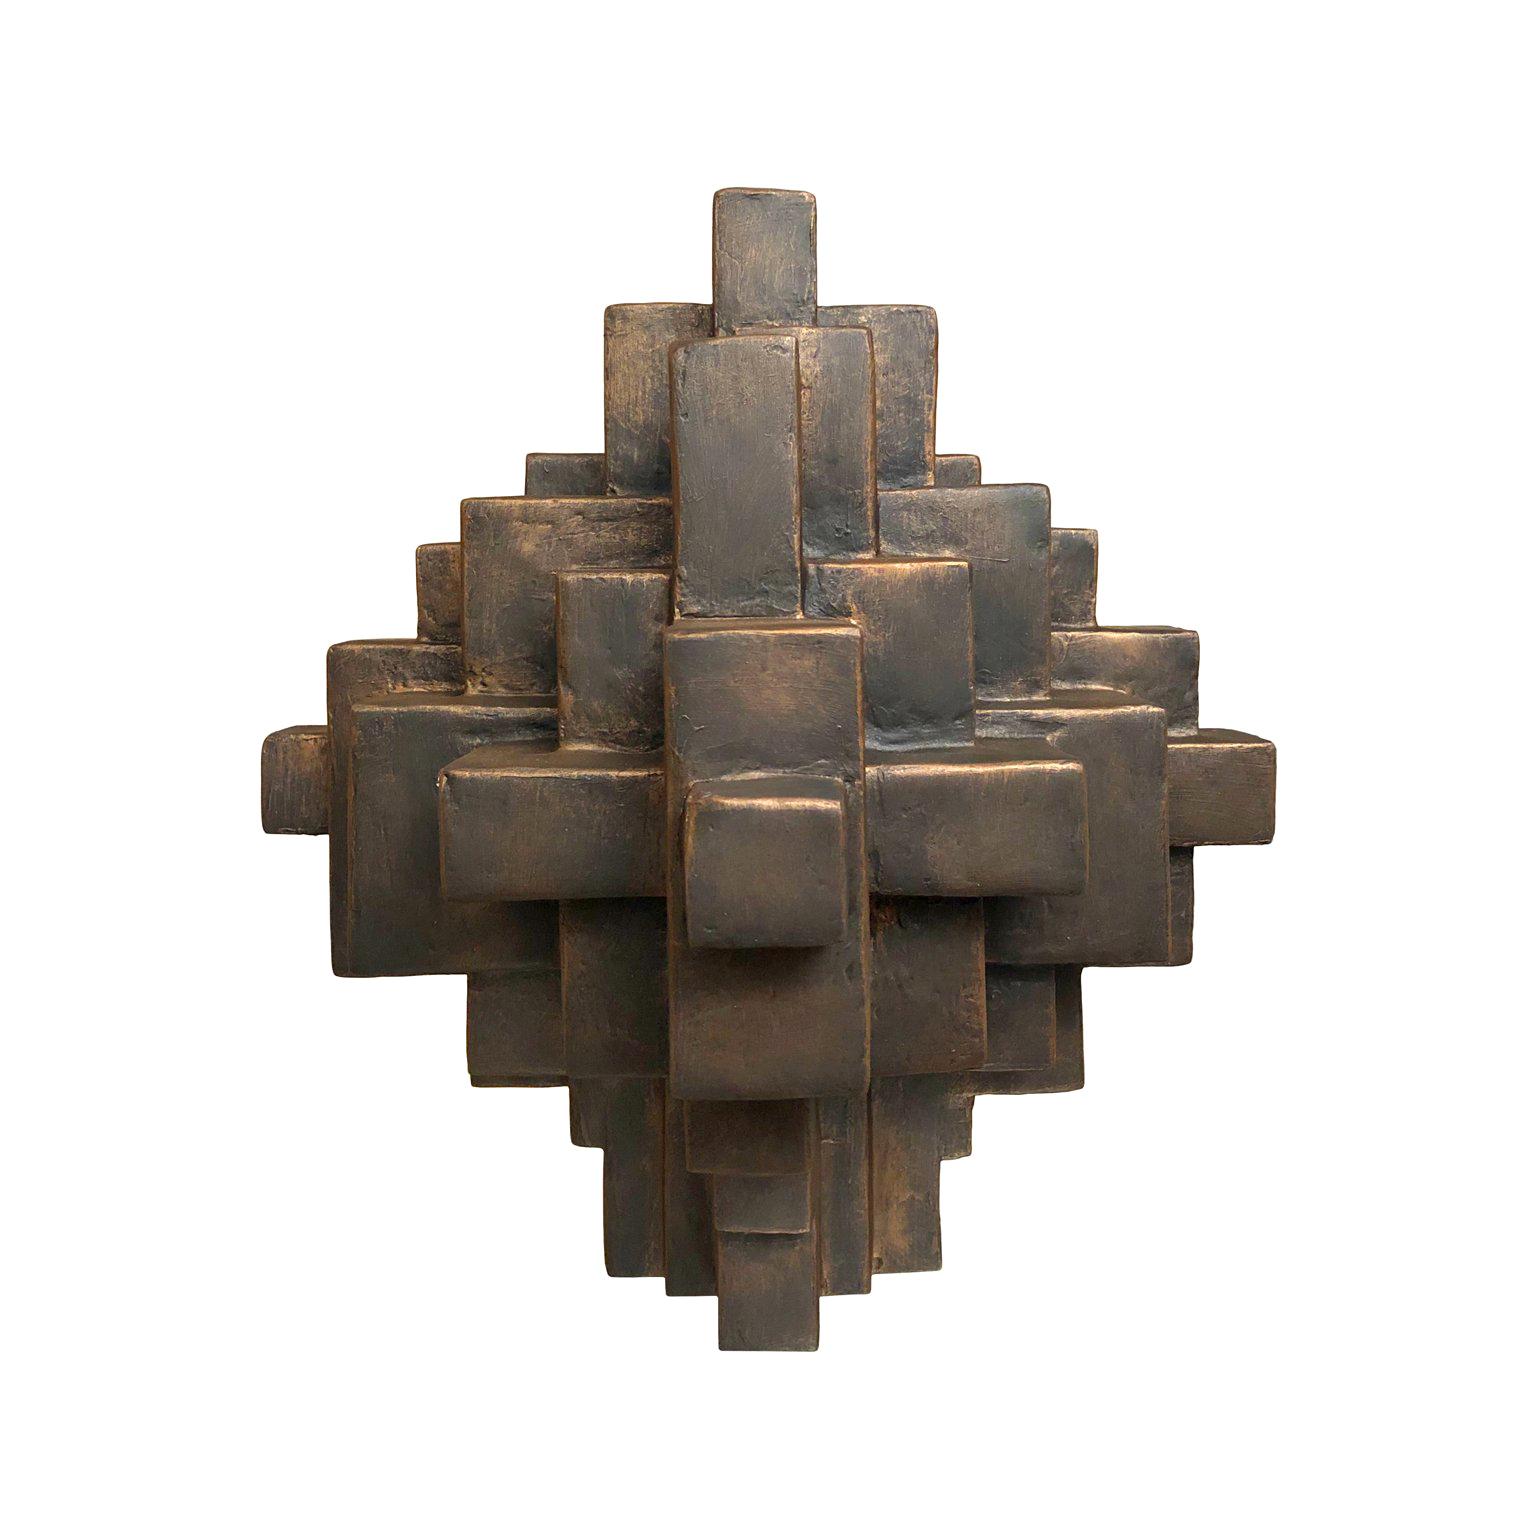 "Composition 11.1" Table Sculpture in Bronze Finish by Dan Schneiger For Sale